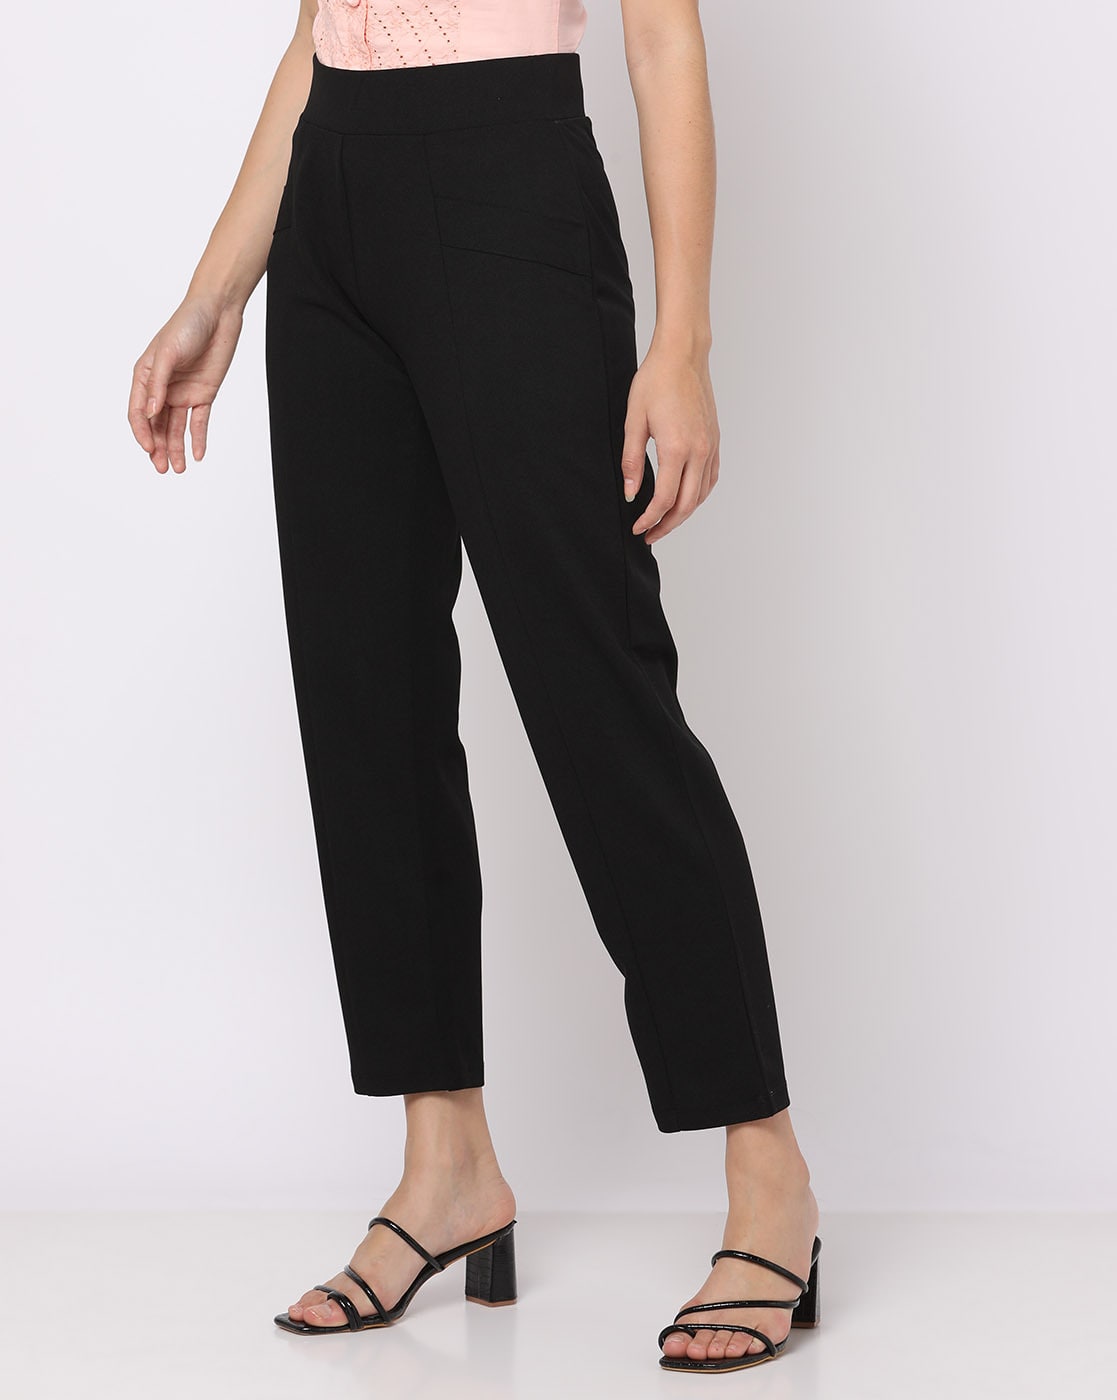 Women's Trousers - Buy Women's Trousers Online at Best Price in India |  Suvidha Stores